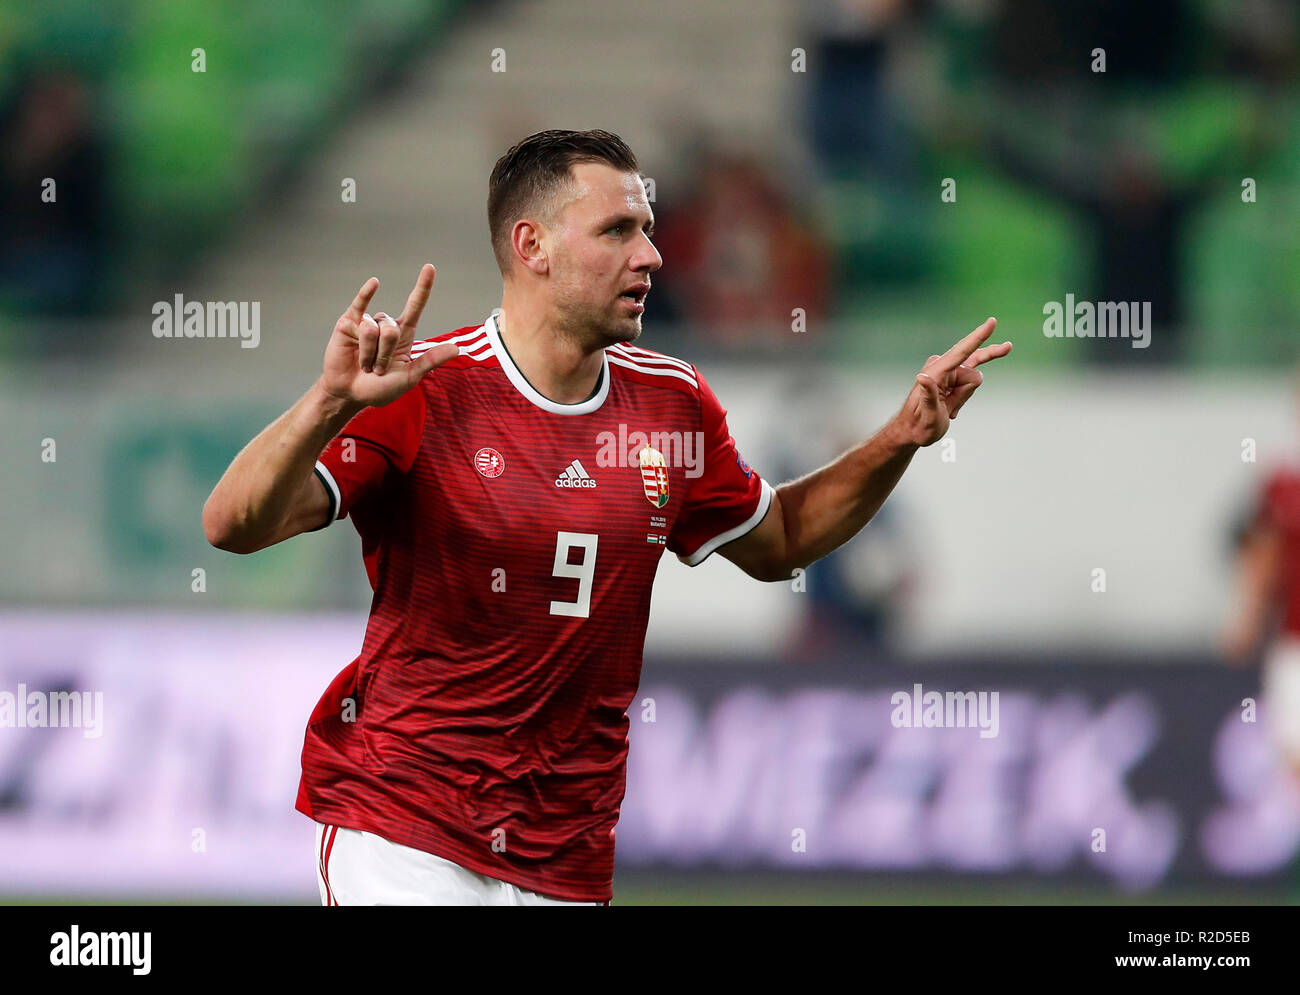 BUDAPEST, HUNGARY - NOVEMBER 18: Adam Szalai of Hungary celebrates his goal during the UEFA Nations League group stage match between Hungary and Finland at Groupama Arena on November 18, 2018 in Budapest, Hungary. Stock Photo